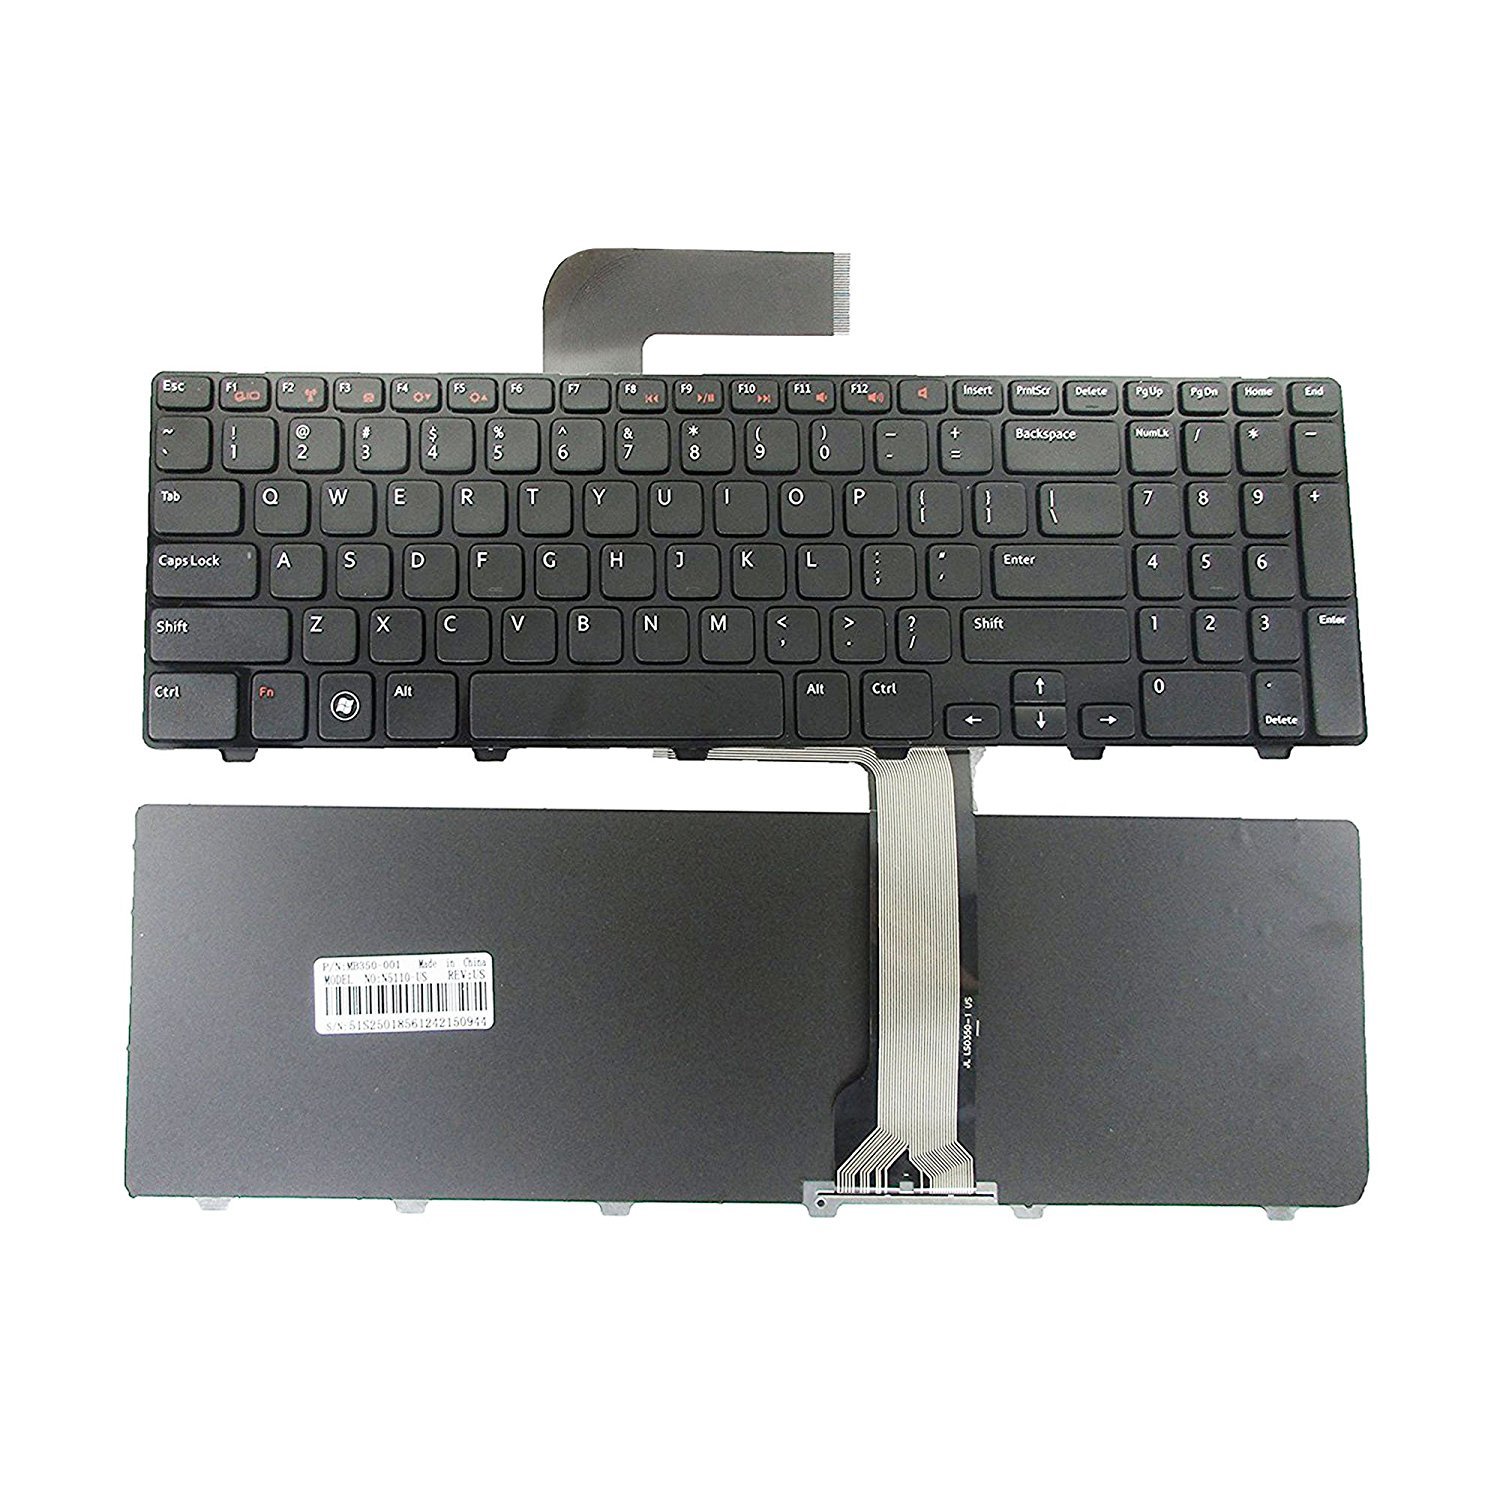 Wistar Laptop Keyboard Compatible for DELL Inspiron 15R N5110 M501Z M511R Ins15RD-2528 2728 2428 Series